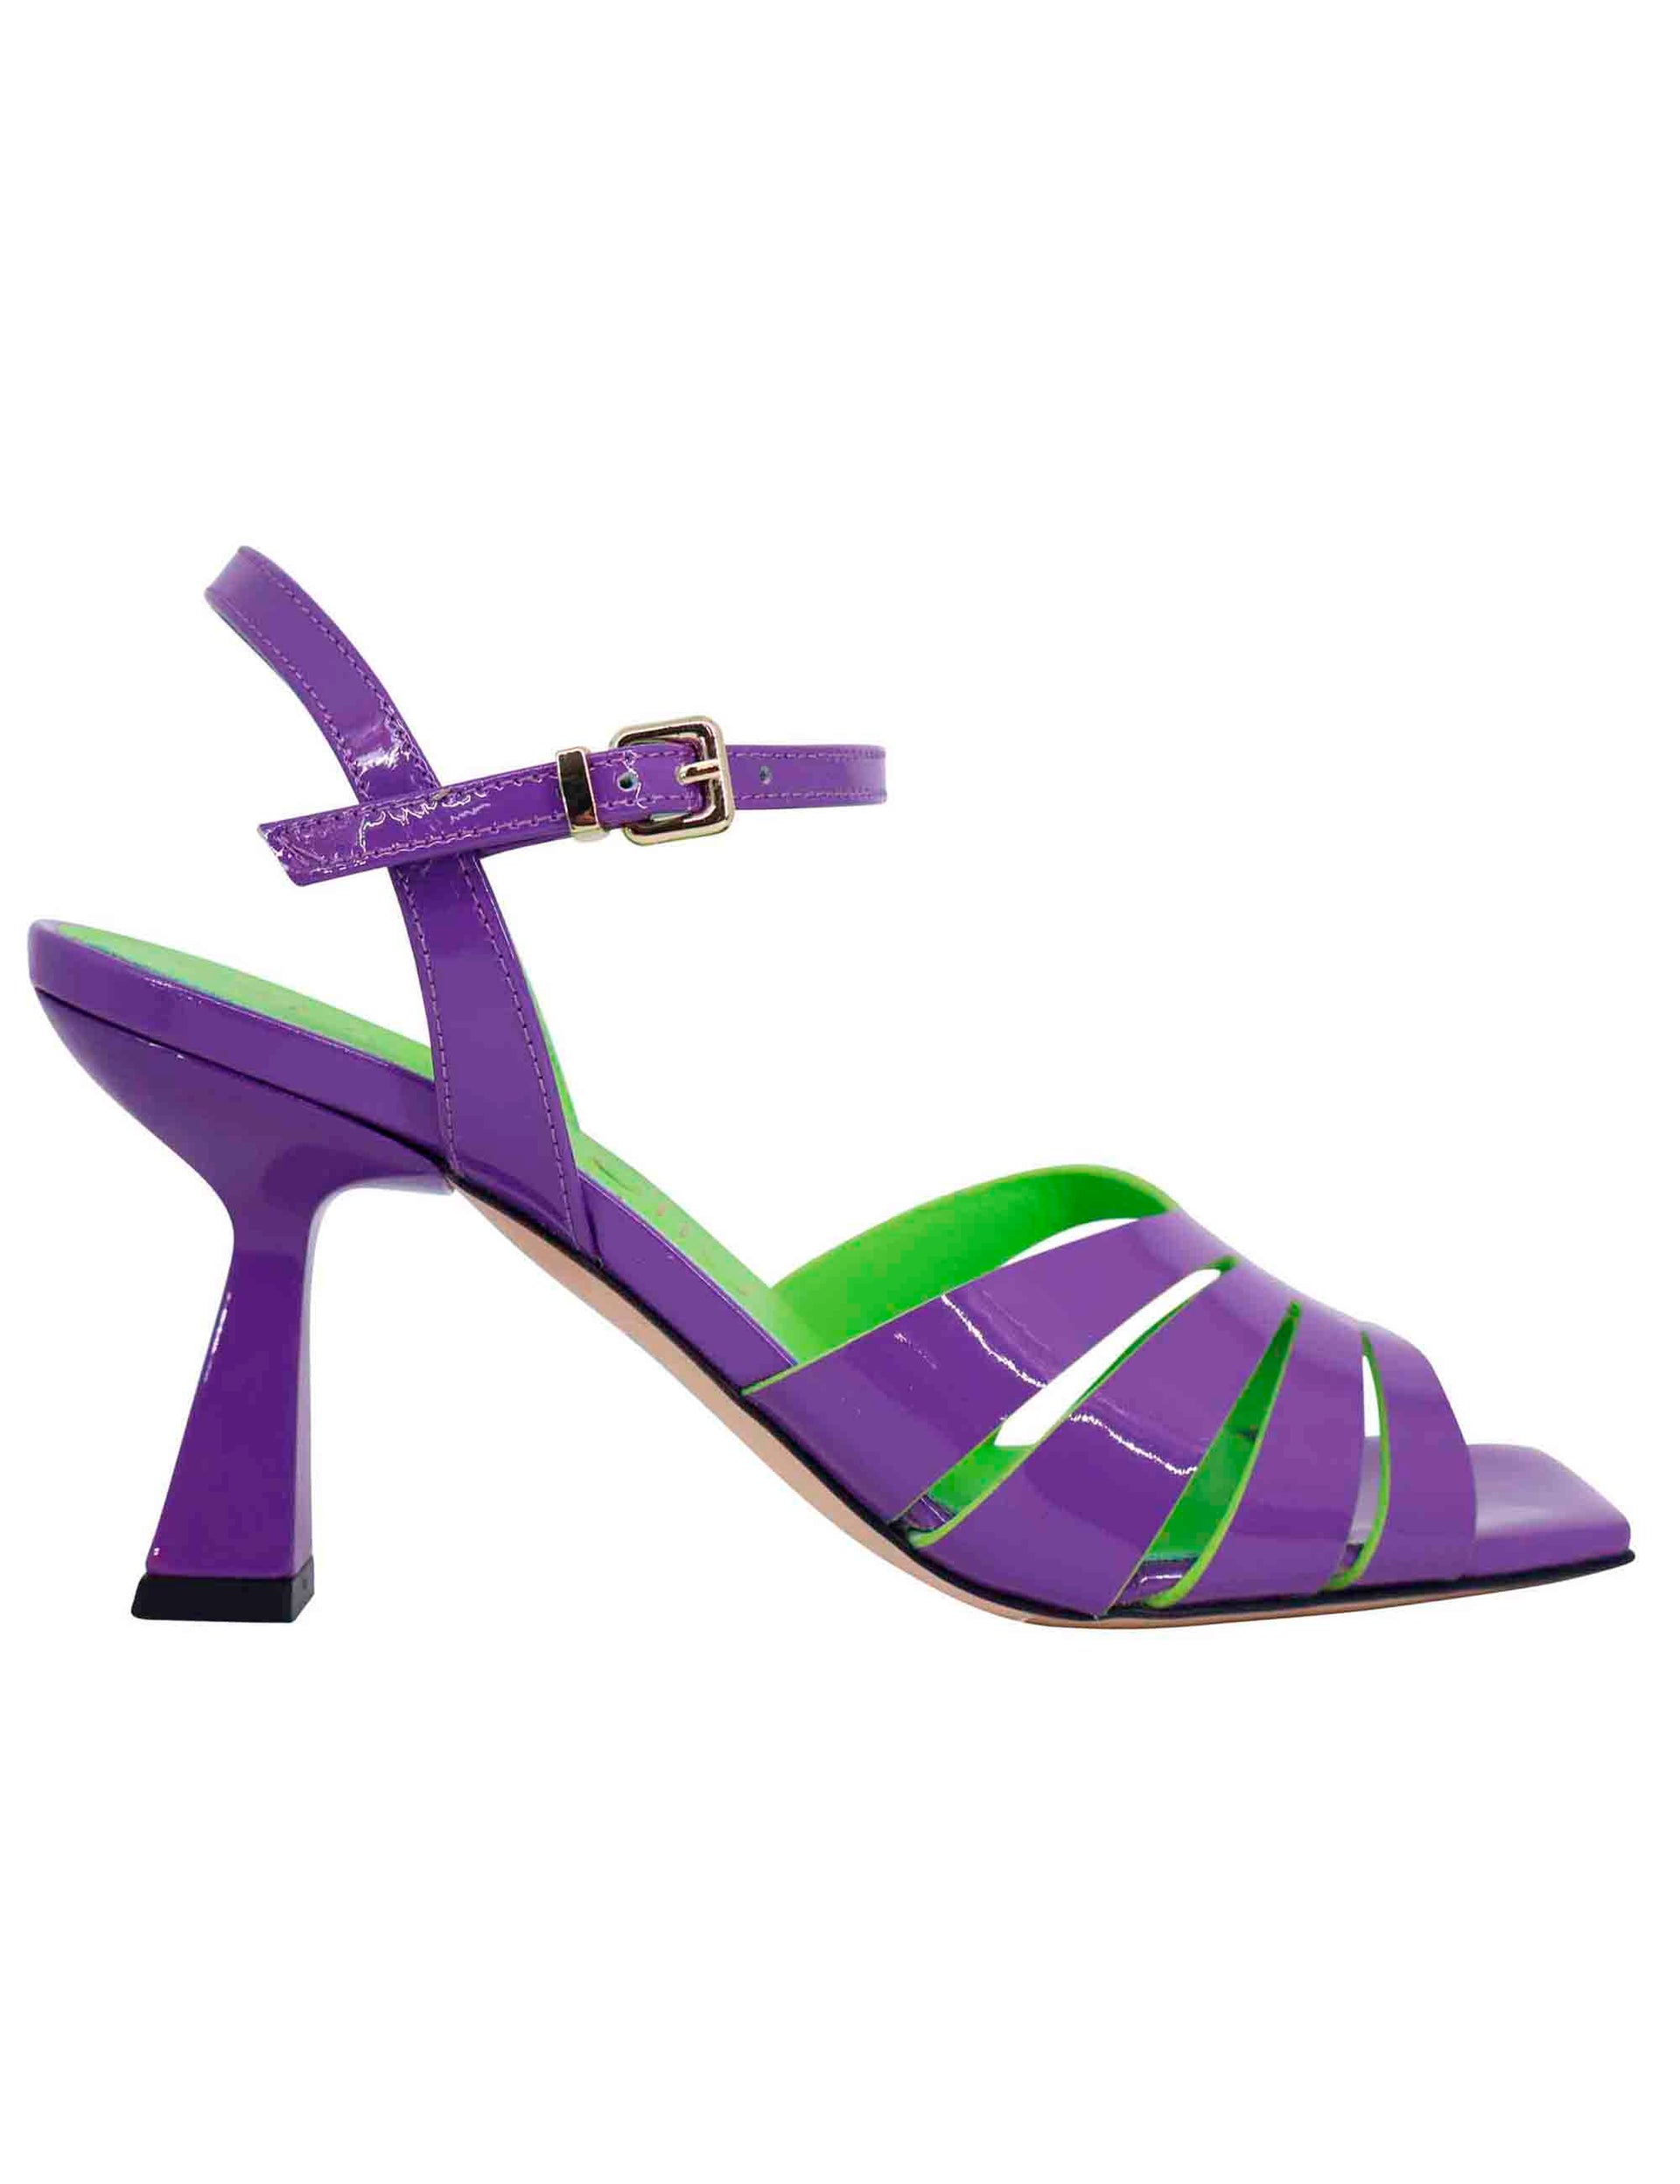 Women's purple patent leather sandals with high heel and ankle strap